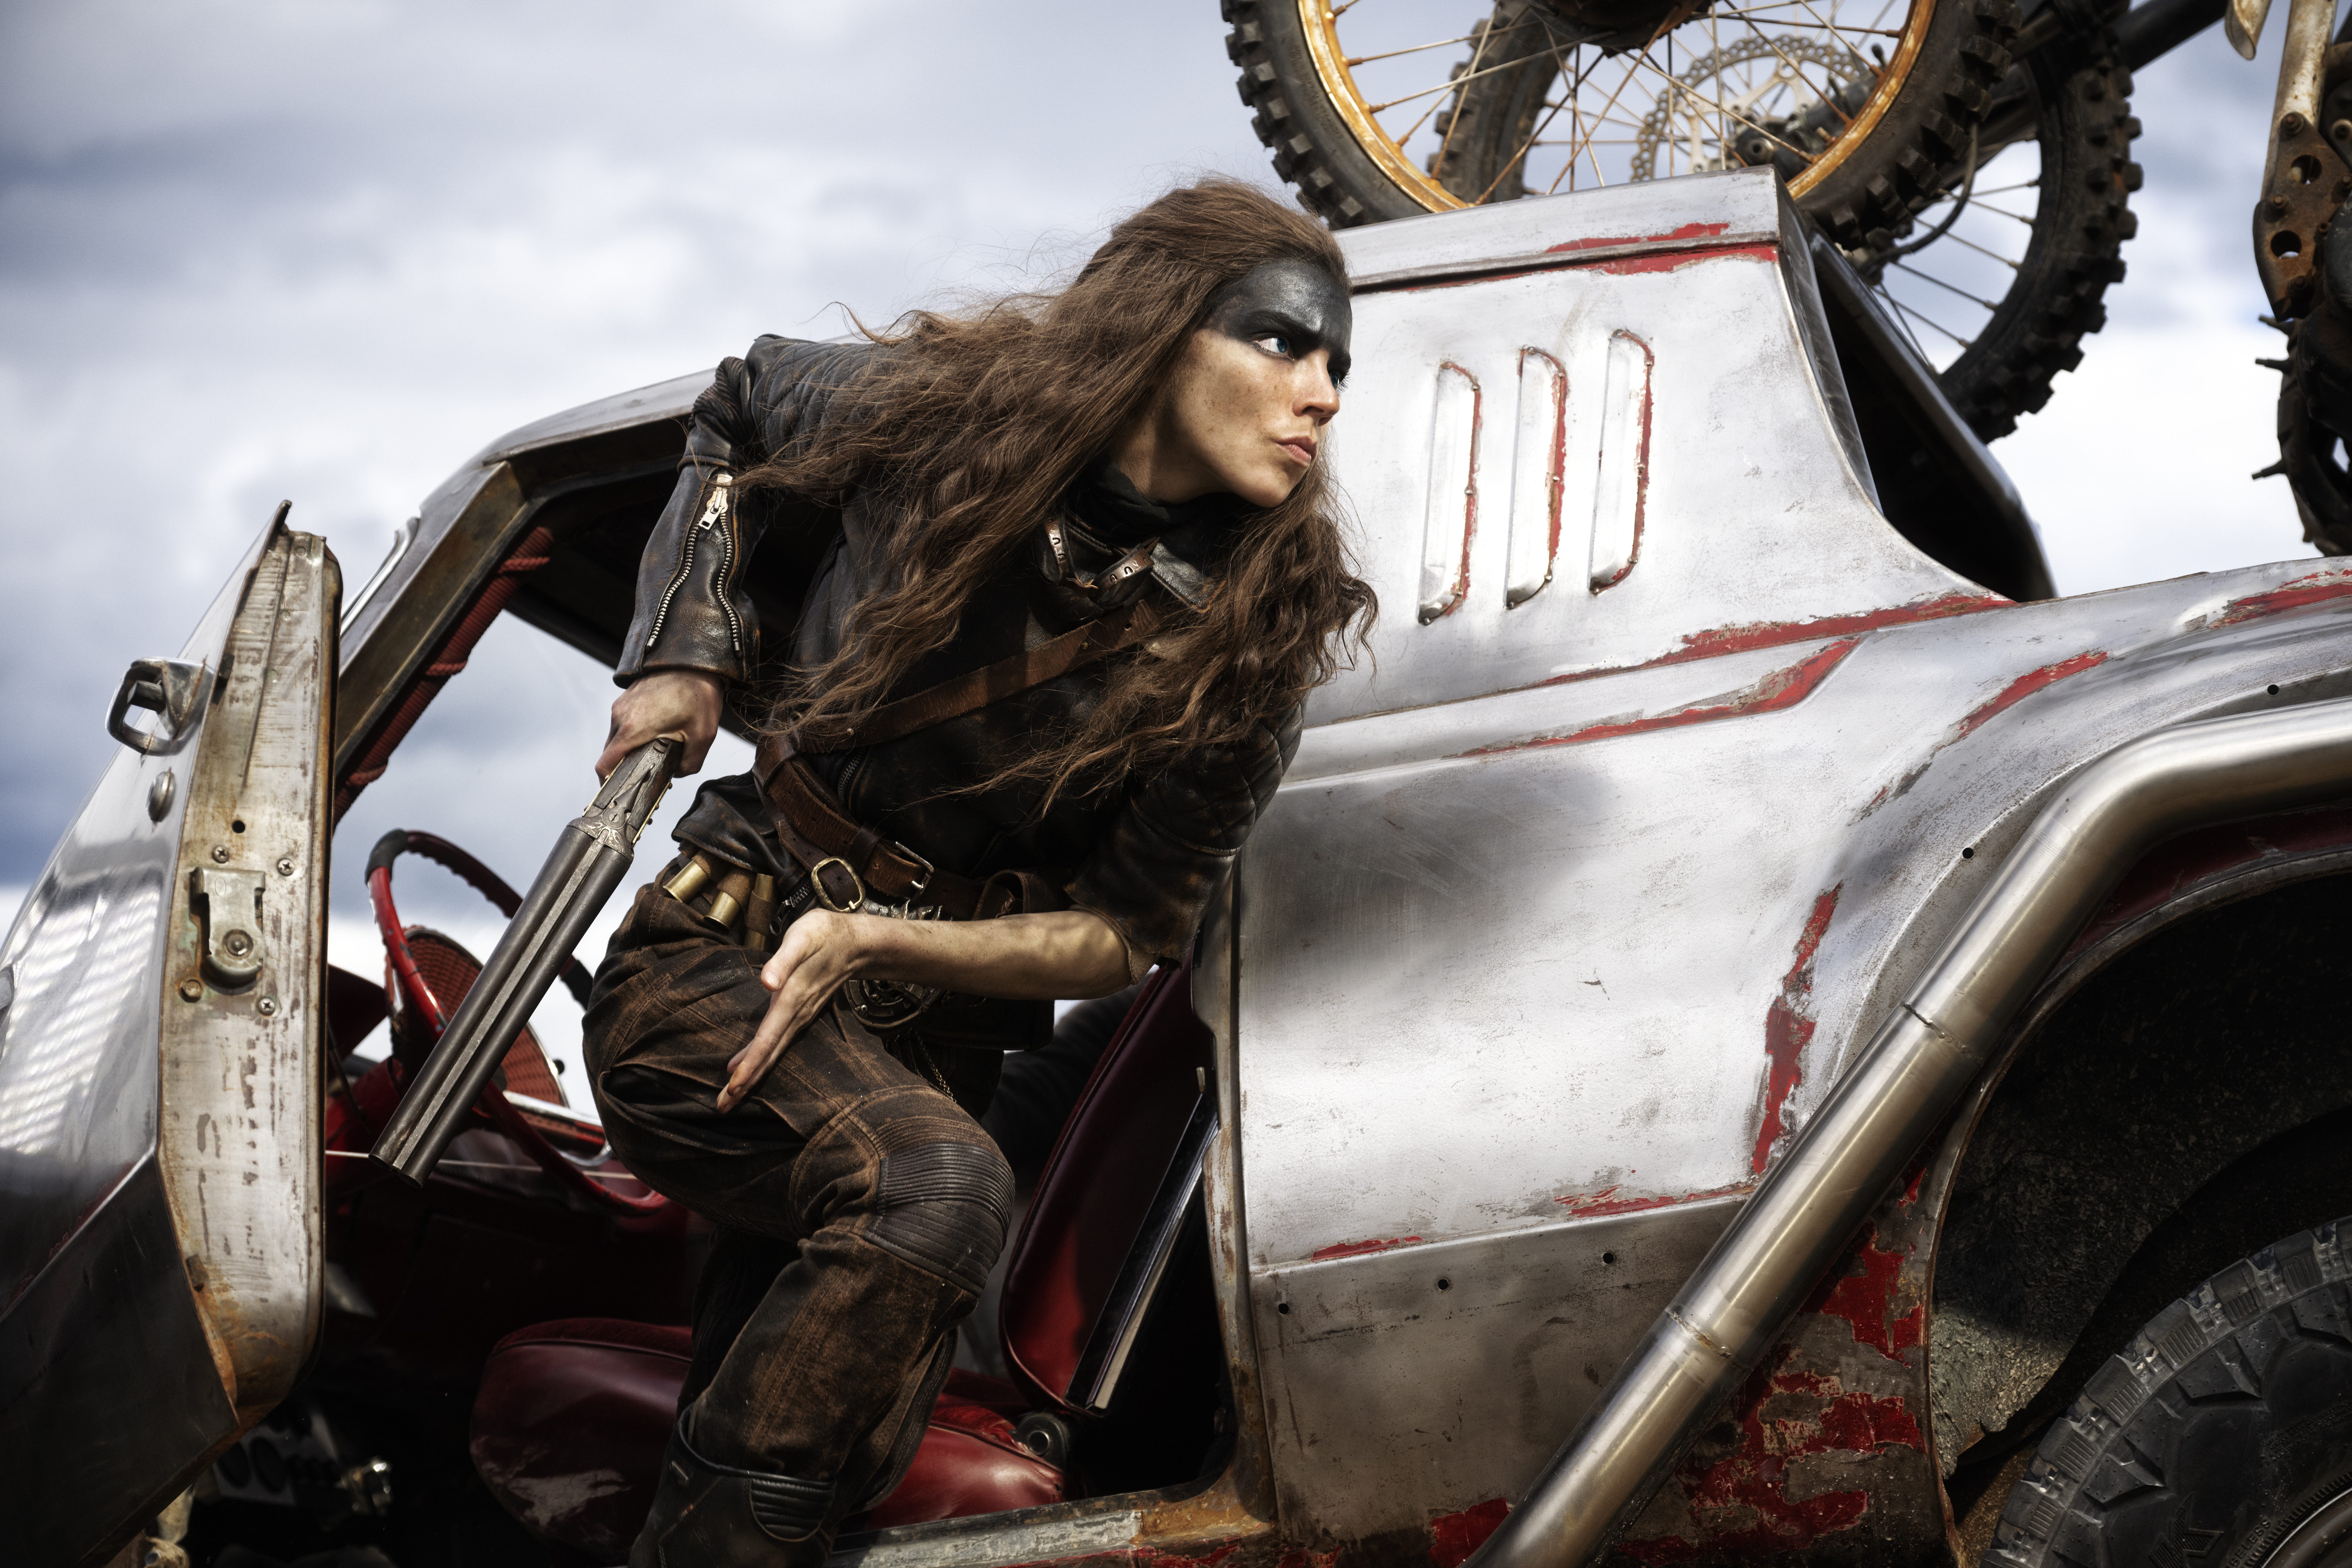 Mad Max 'Furiosa' review: New prequel is a snazzy action movie, but no 'Fury Road'